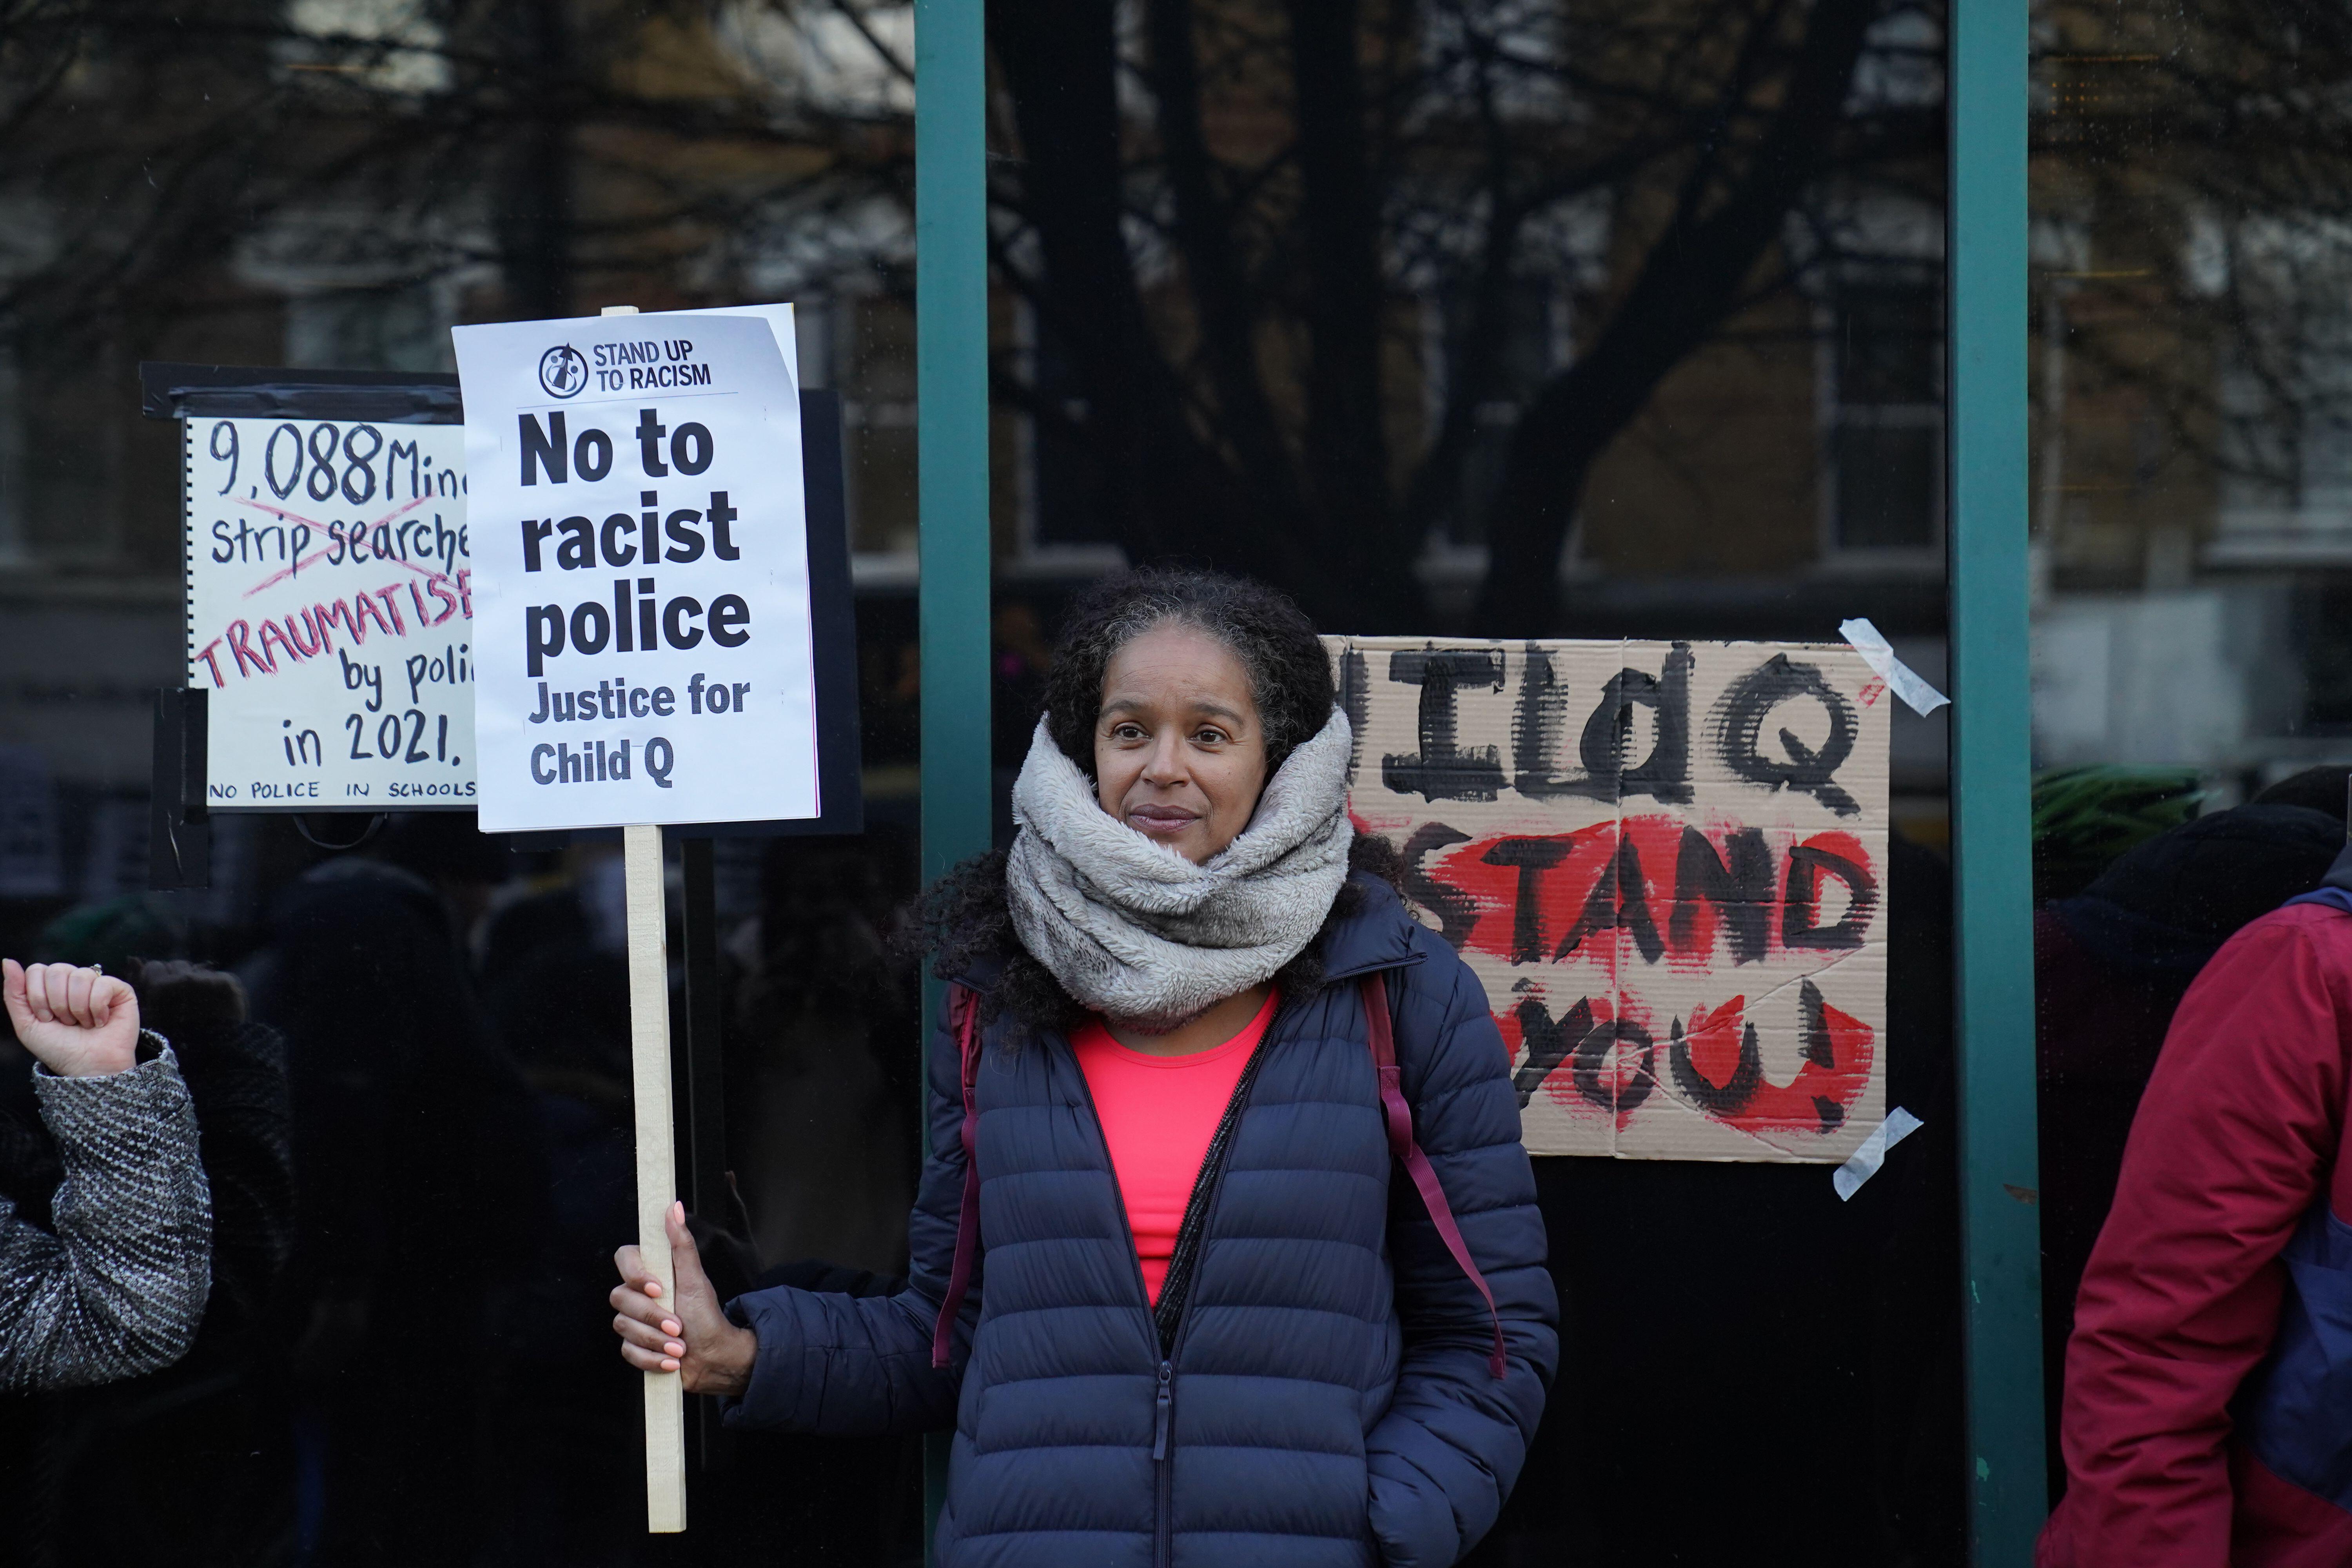 People demonstrate outside Stoke Newington Police Station in London, over the treatment of a black 15-year-old schoolgirl who was strip-searched by police while on her period